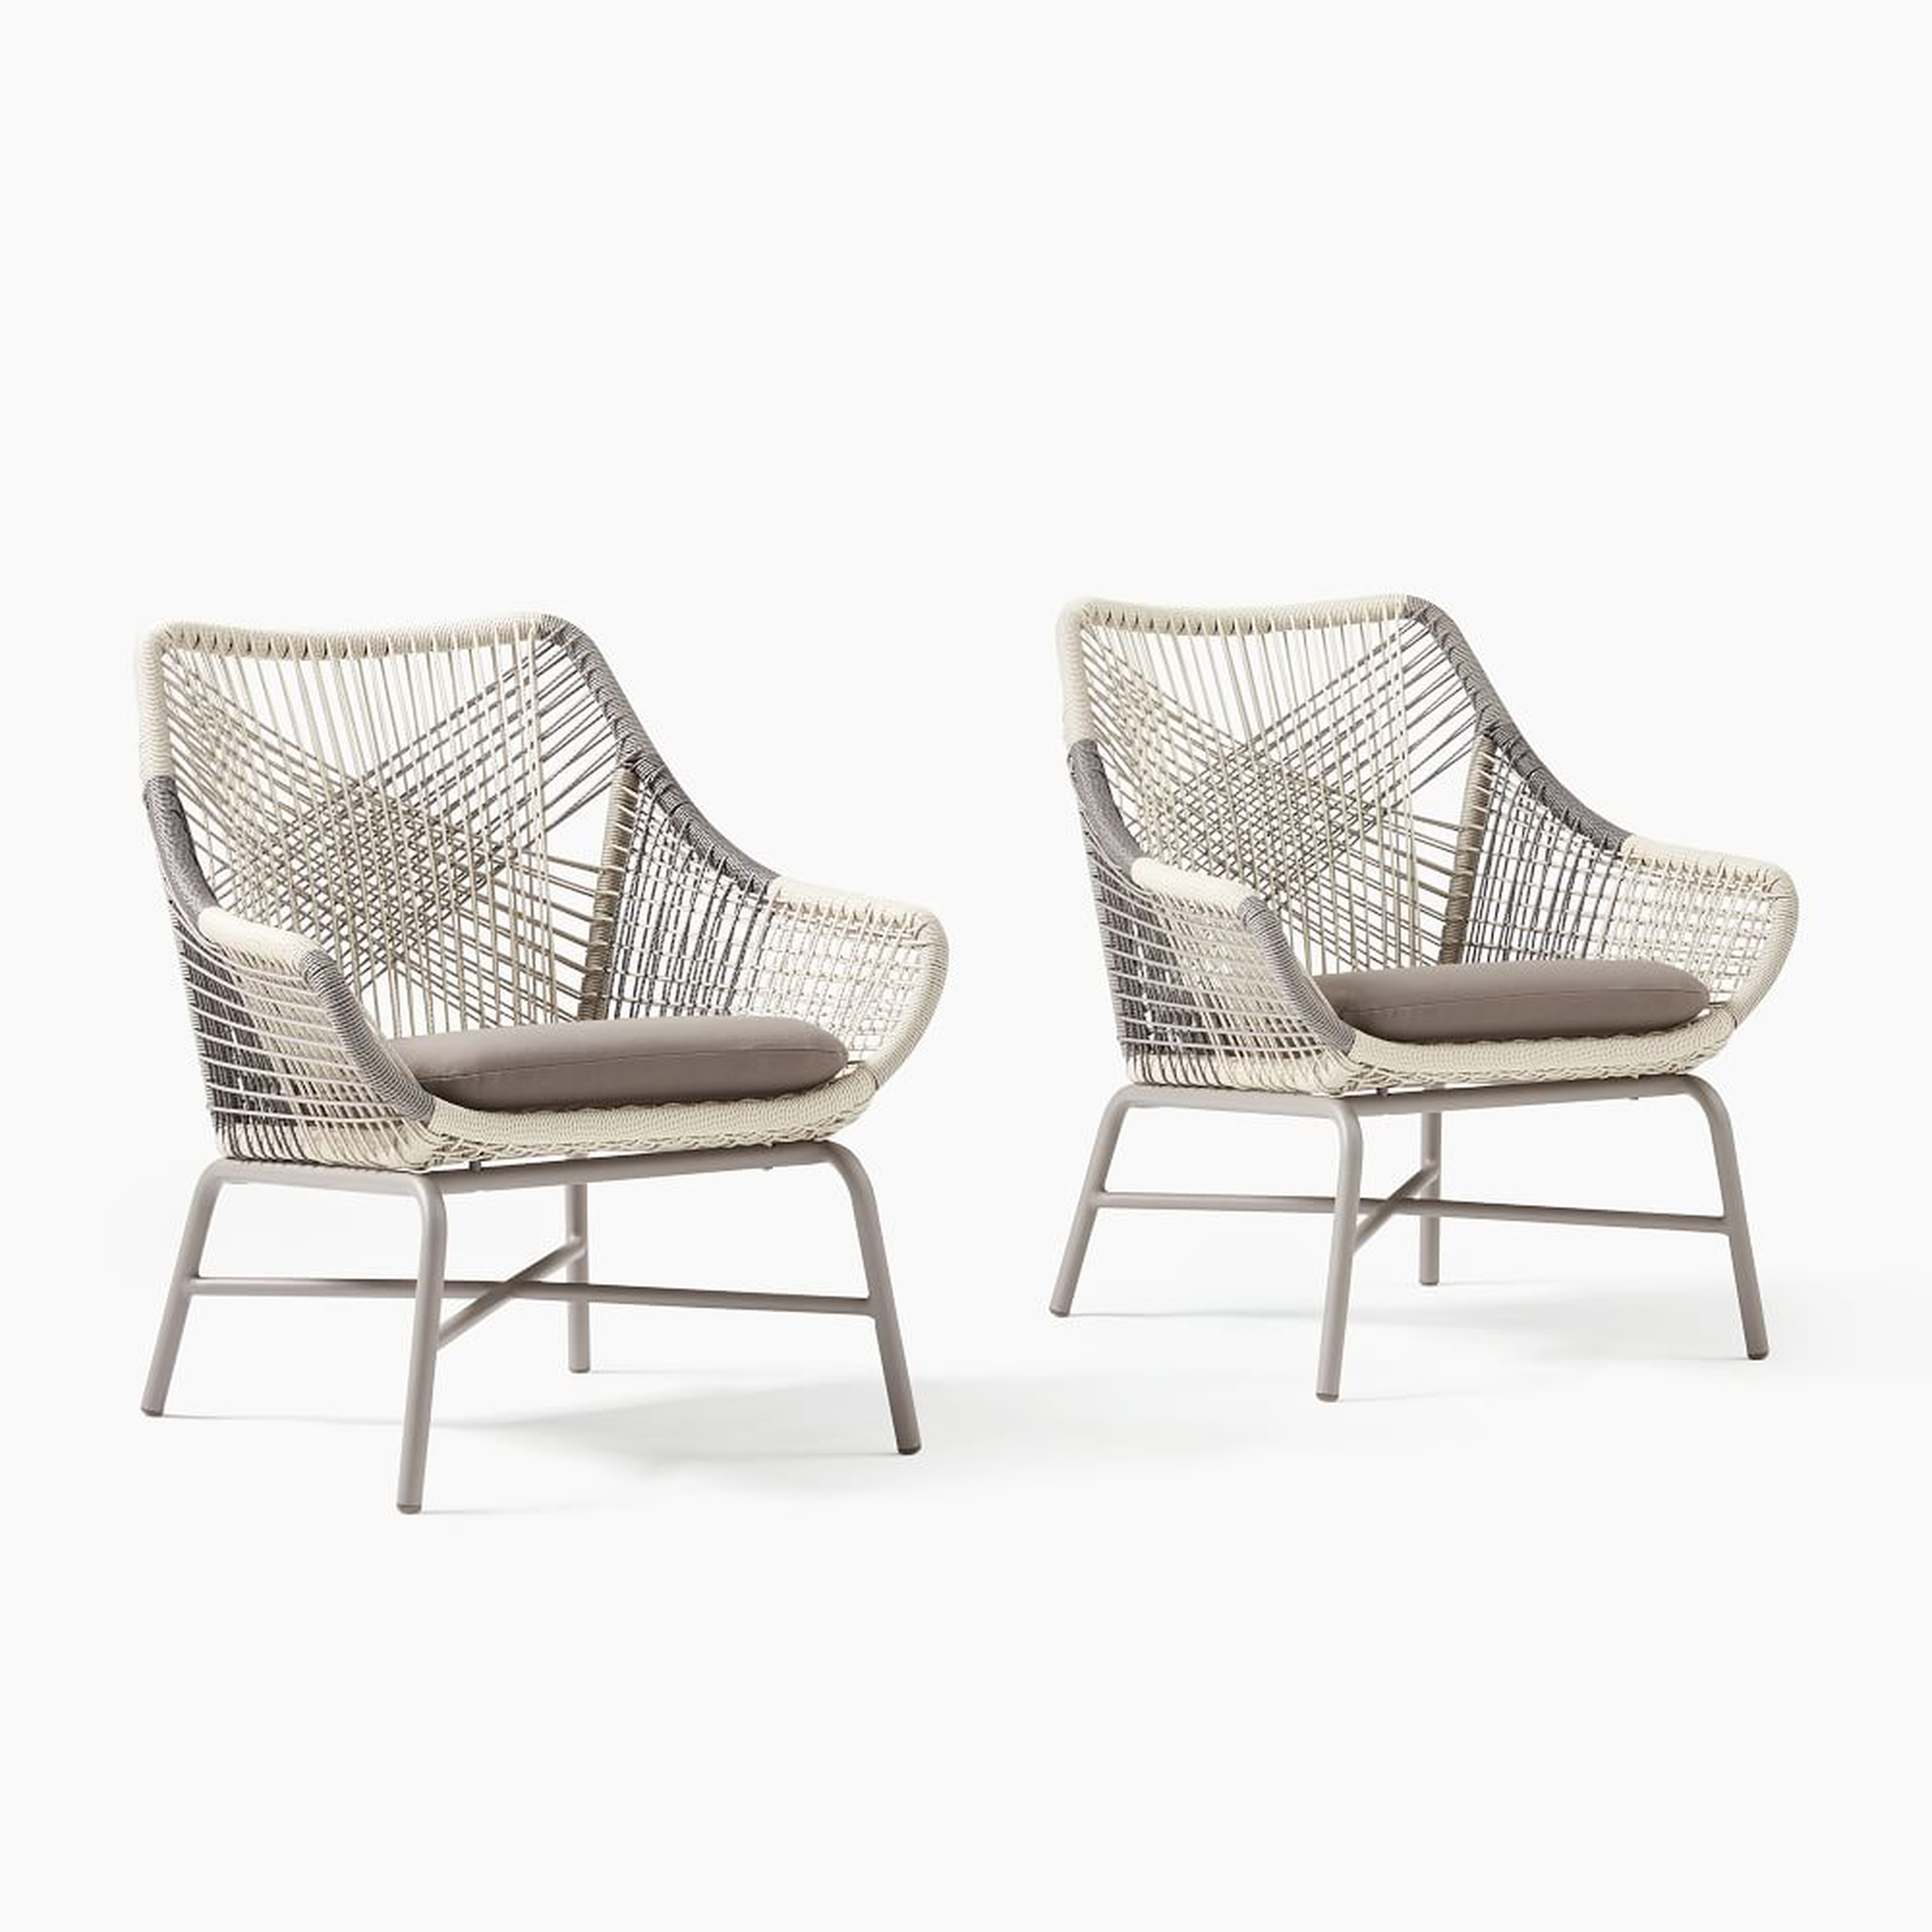 Huron Lounge Chair, Small, Set of 2 - West Elm